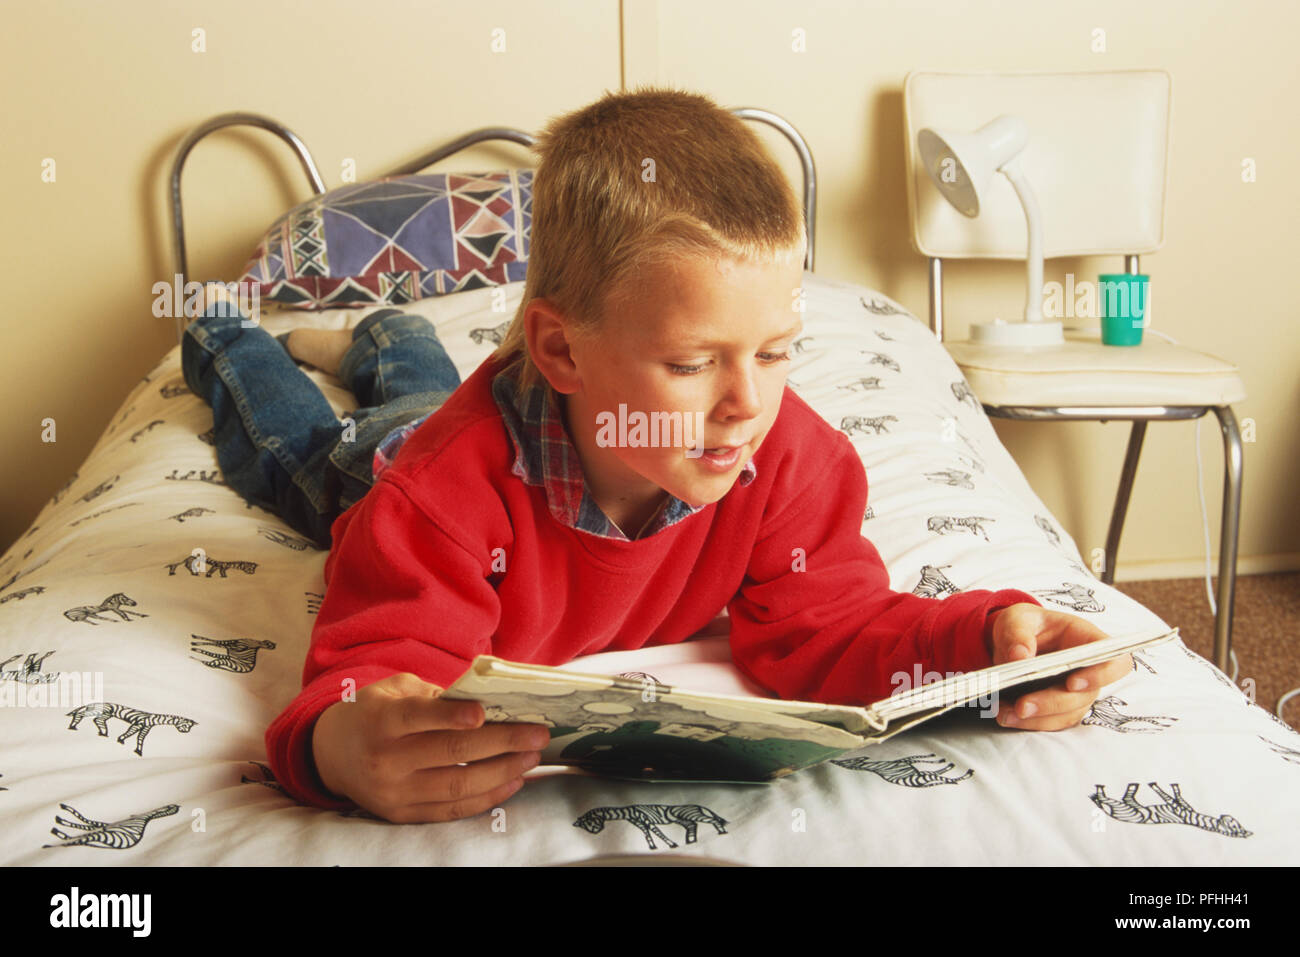 Blonde boy lying on his front on a bed reading a book, front view. Stock Photo